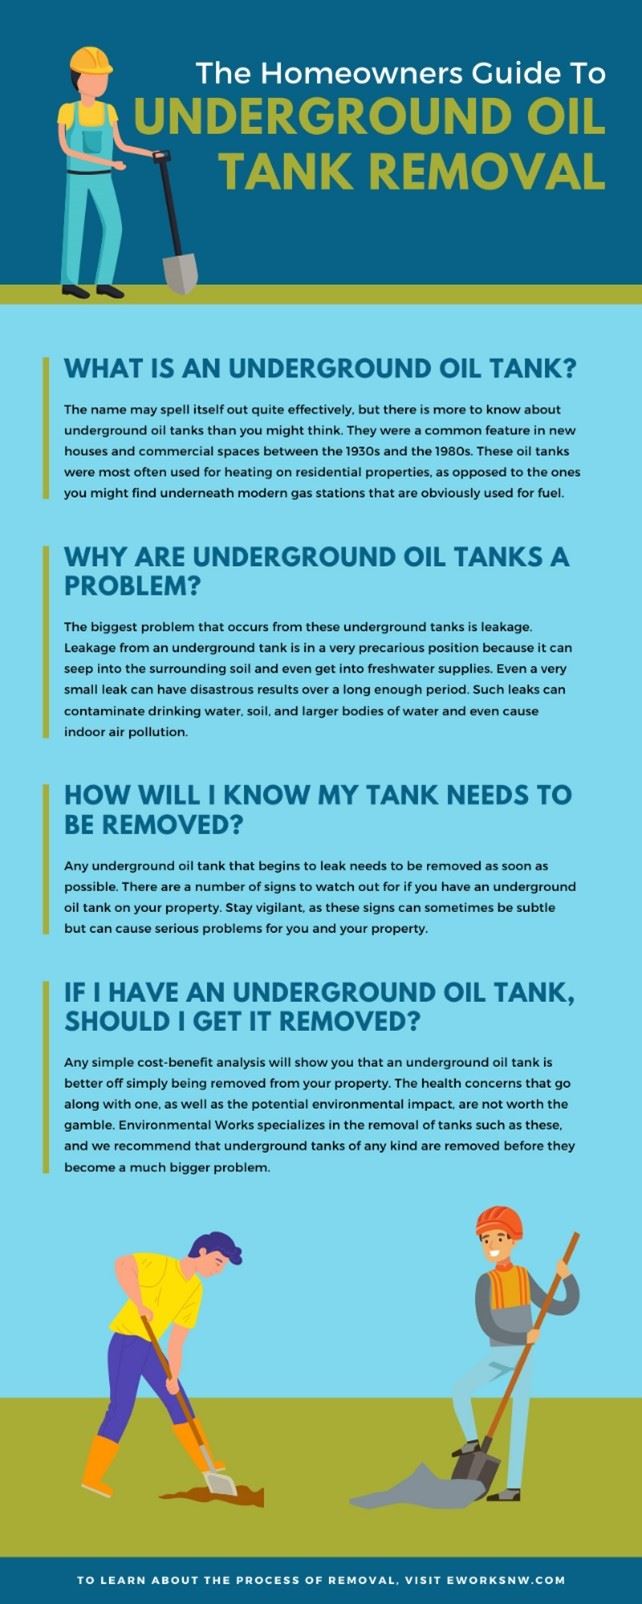 The Homeowners Guide To Underground Oil Tank Removal